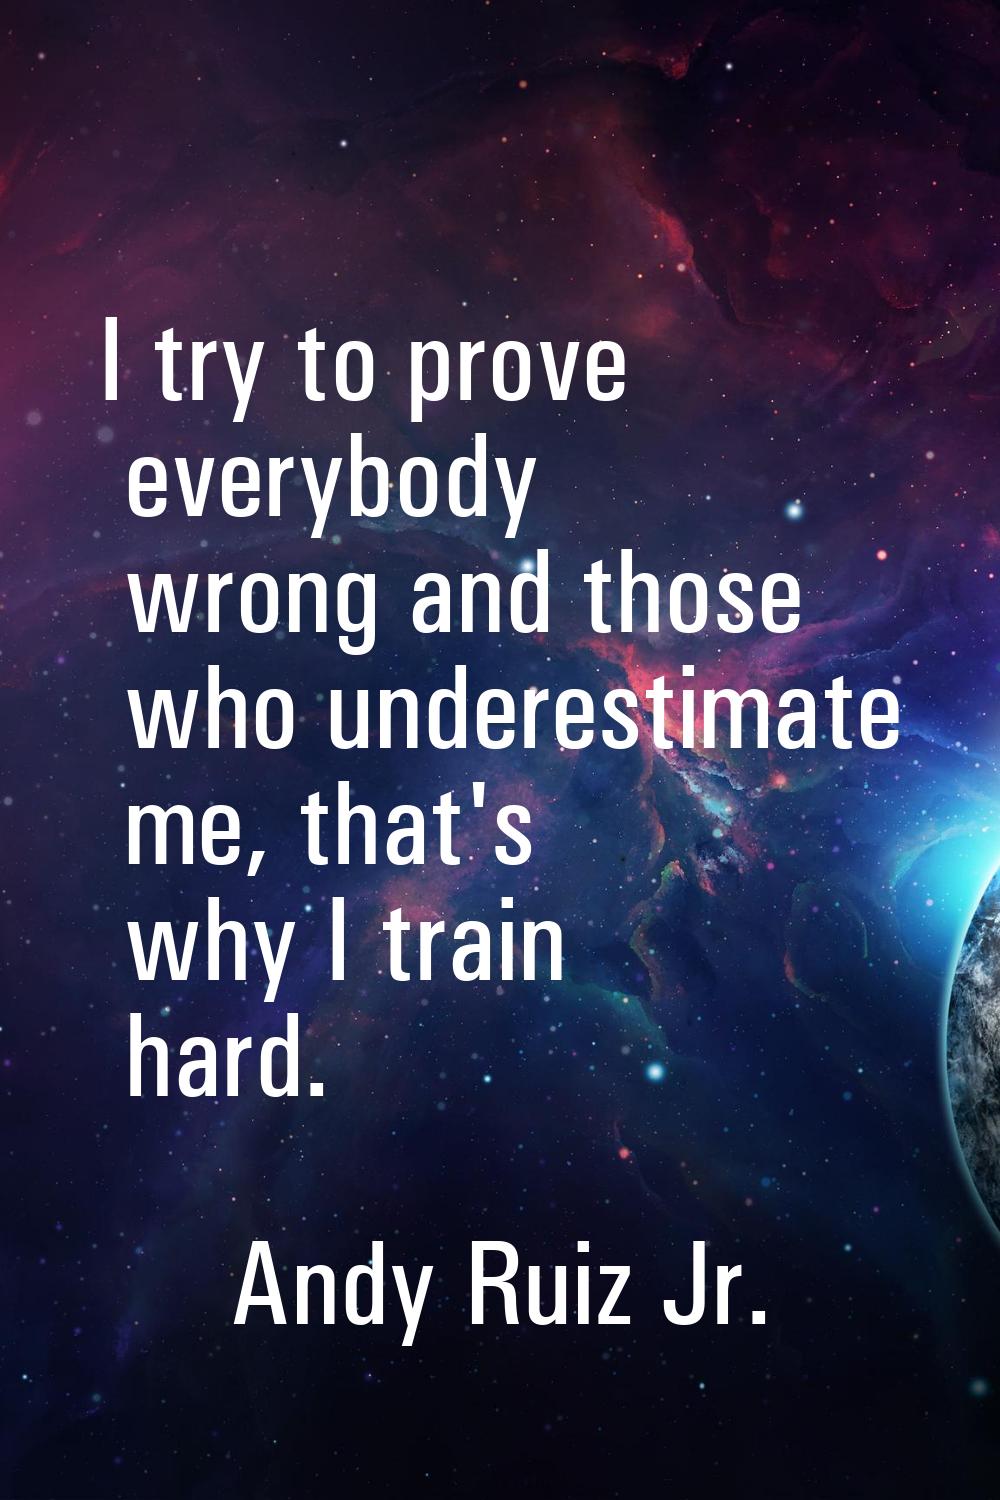 I try to prove everybody wrong and those who underestimate me, that's why I train hard.